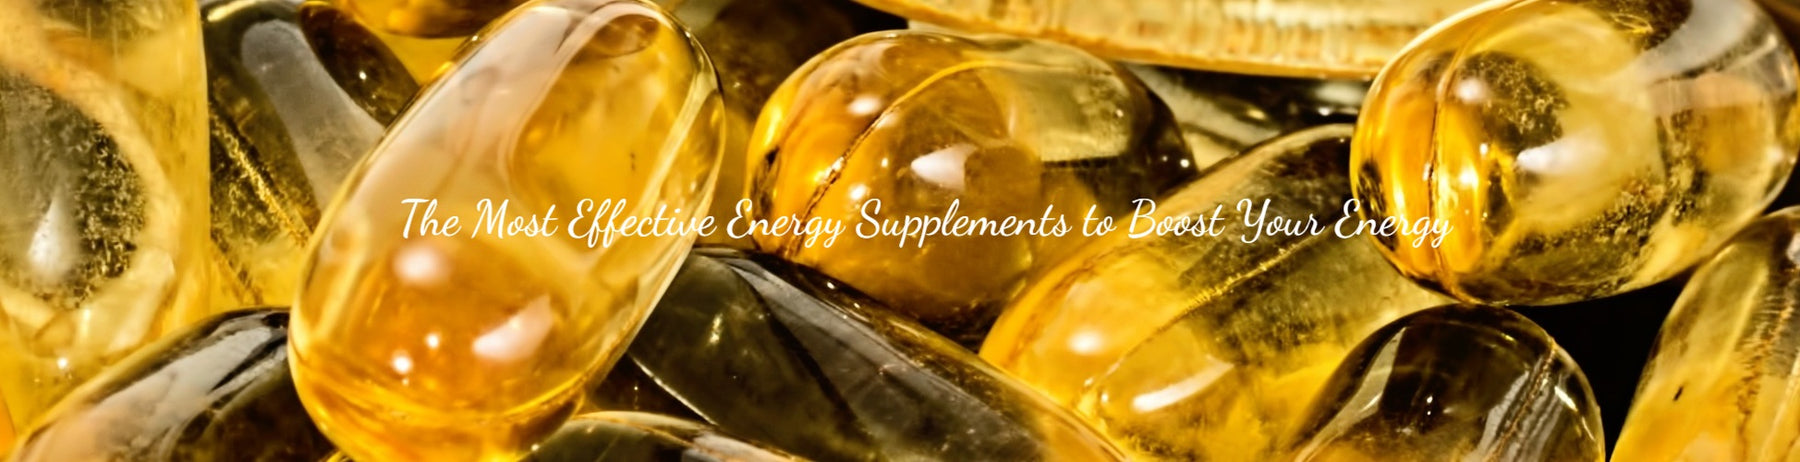 The Most Effective Energy Supplements to Boost Your Energy